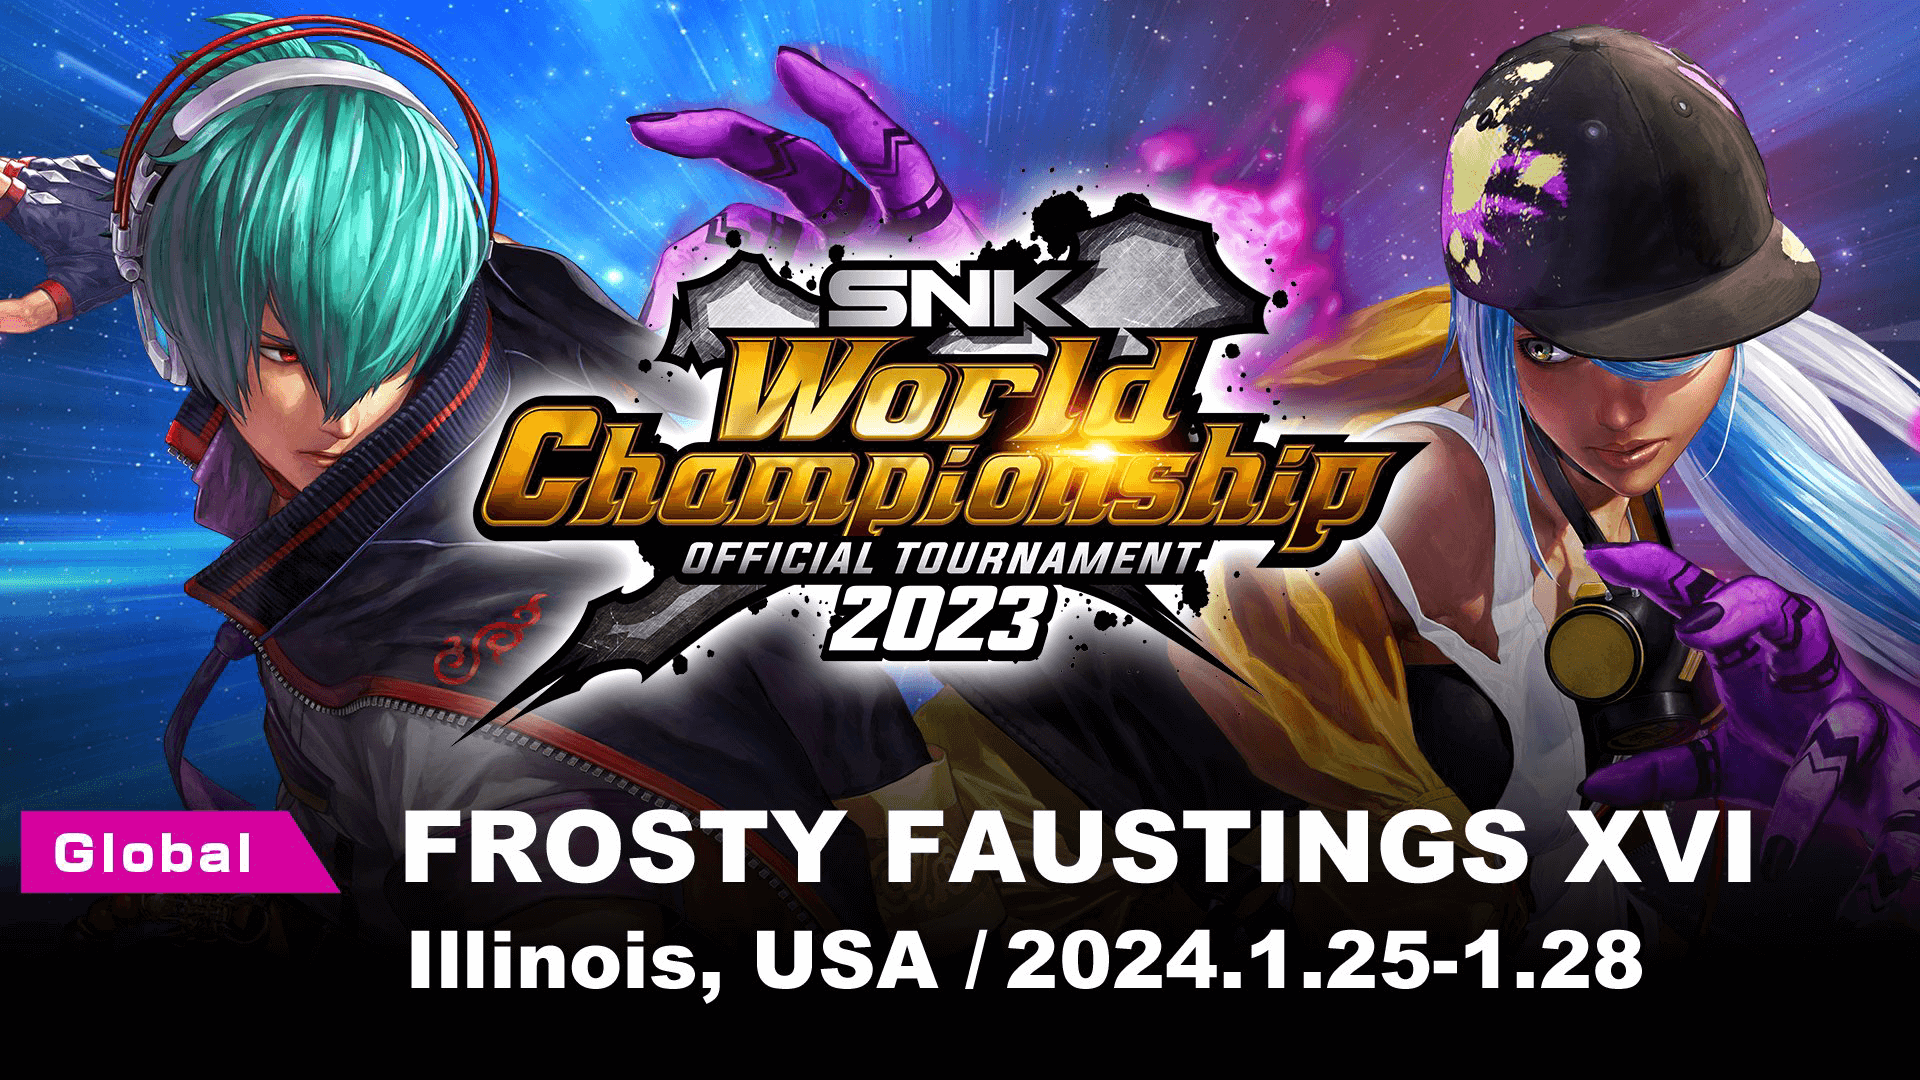 Frosty Faustings XVI is Part of the SNK World Championship